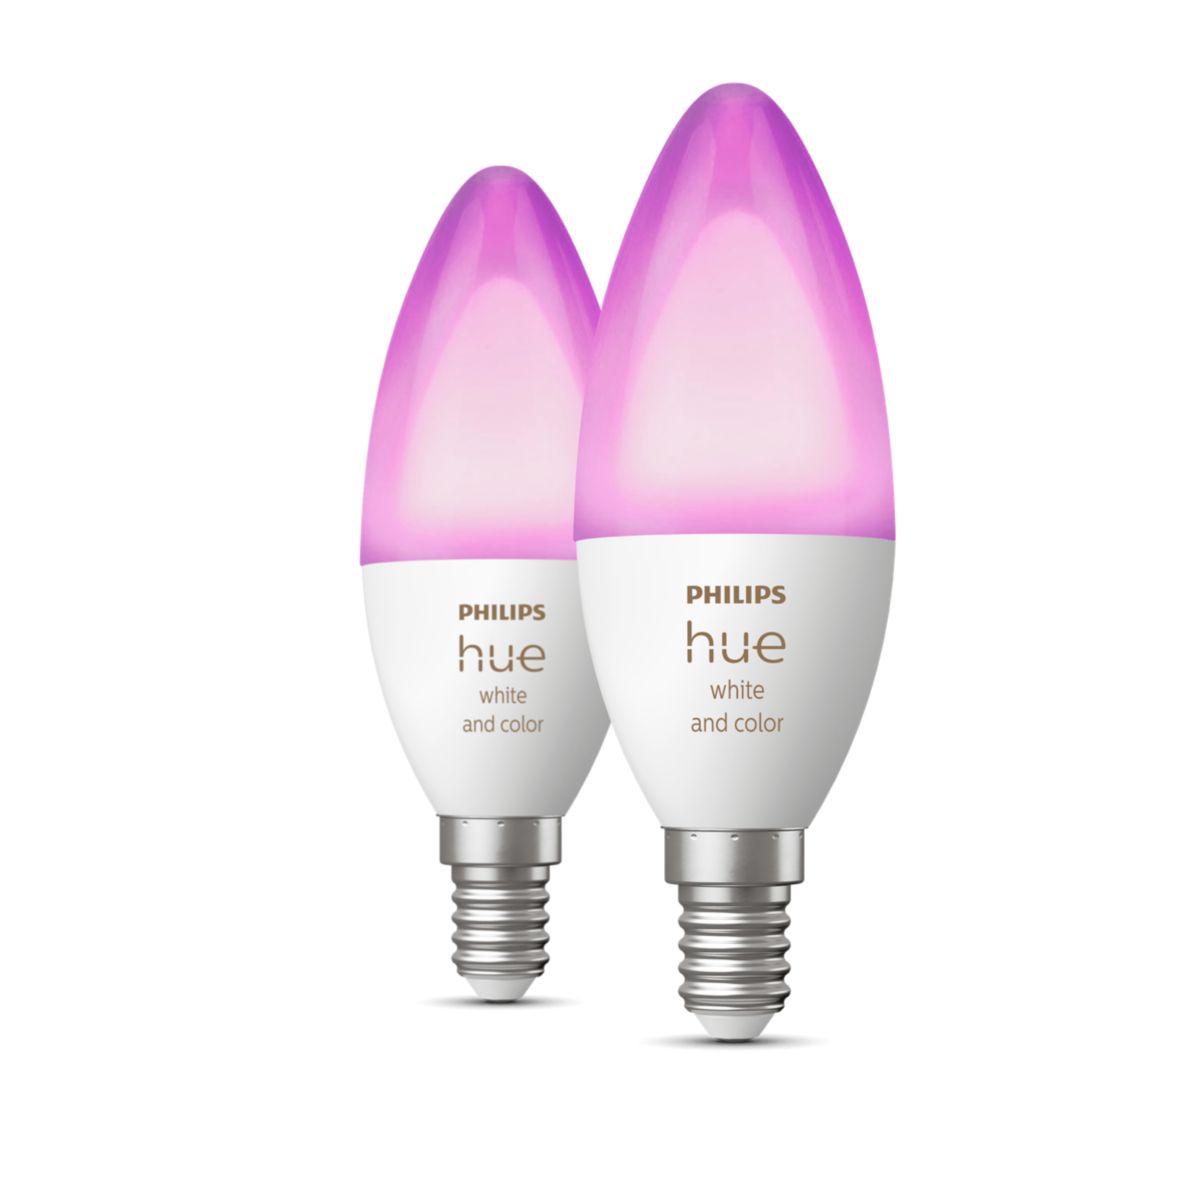 Philips Hue E14 kaarslamp white and color ambiance 470lm 2-pack